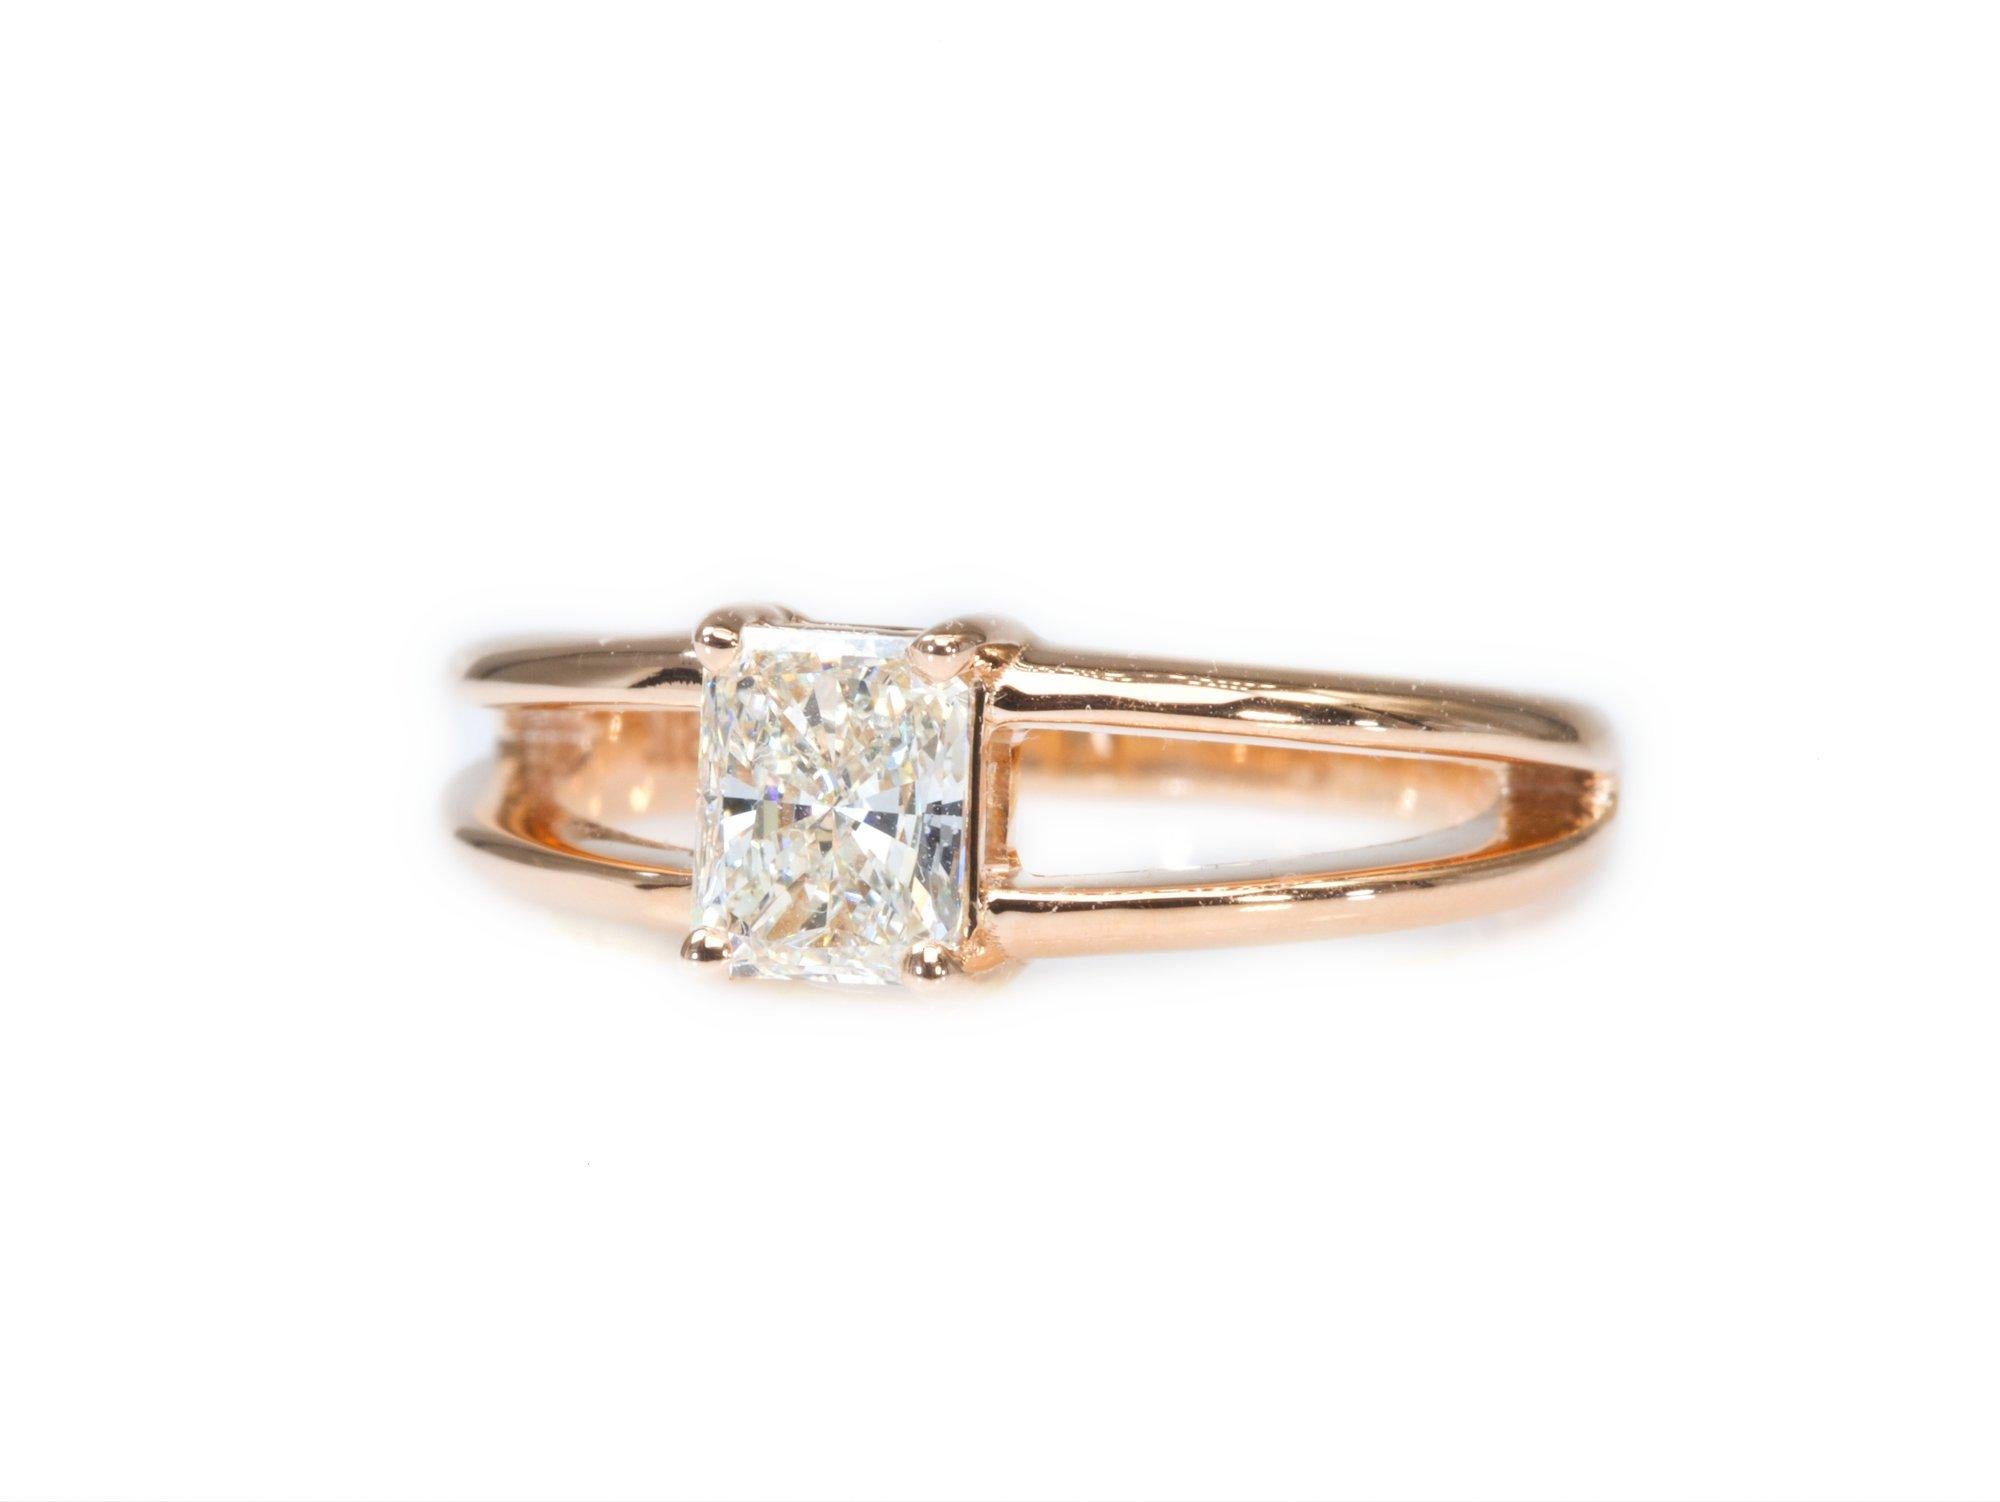 Radiant Cut Stunning 18K Rose Gold Ring with 0.50 carat Natural Diamond- GIA Certificate For Sale